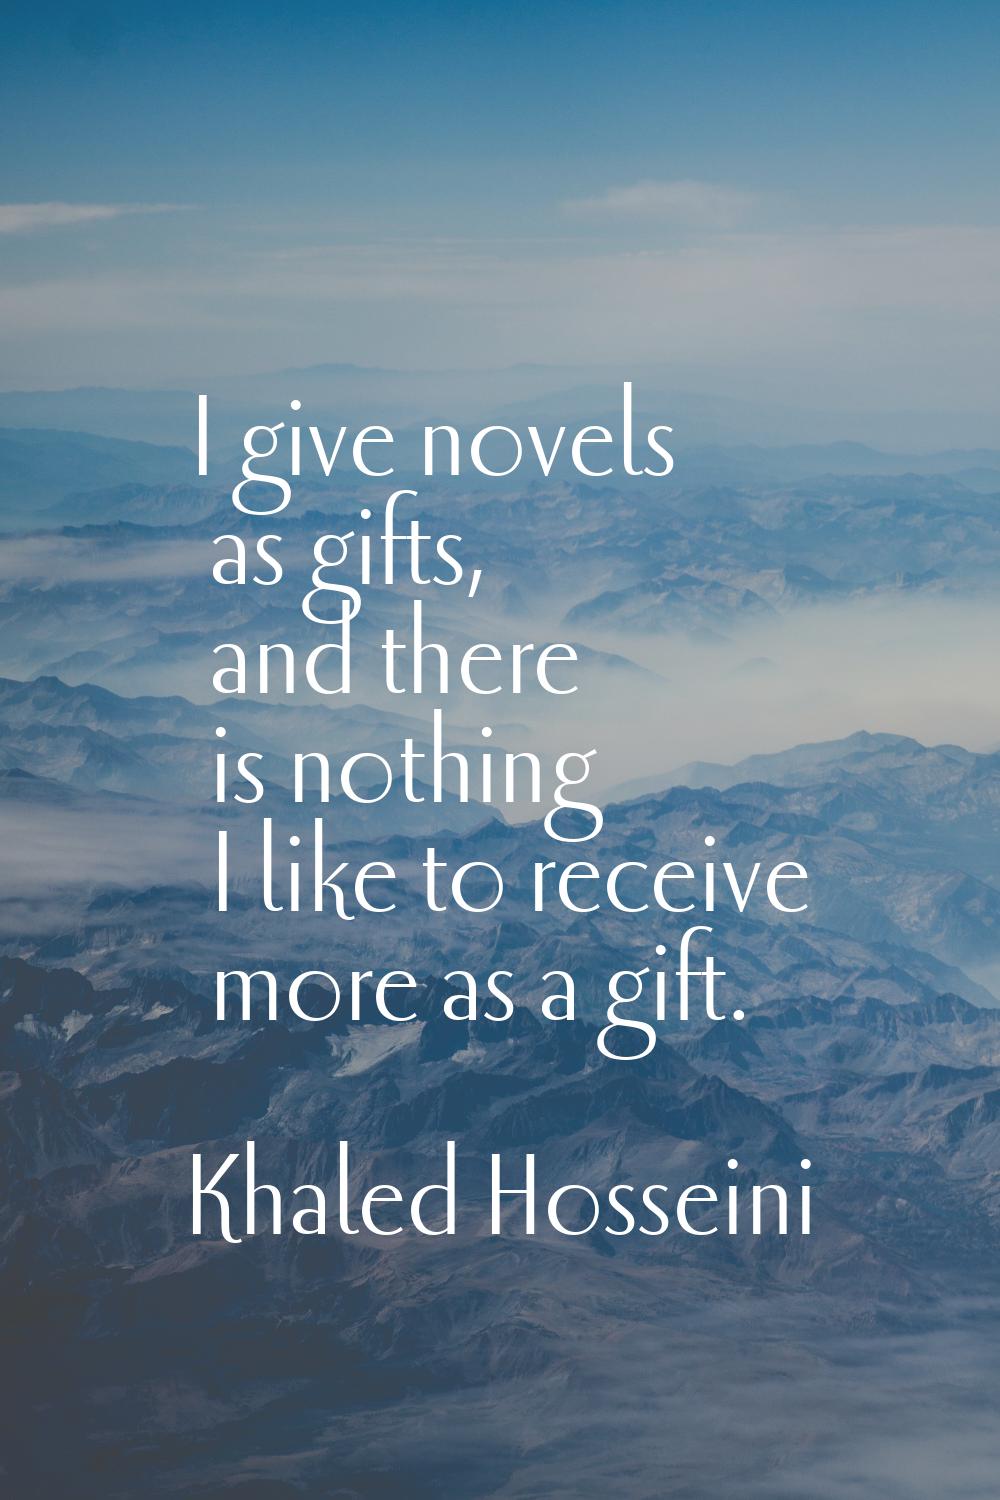 I give novels as gifts, and there is nothing I like to receive more as a gift.